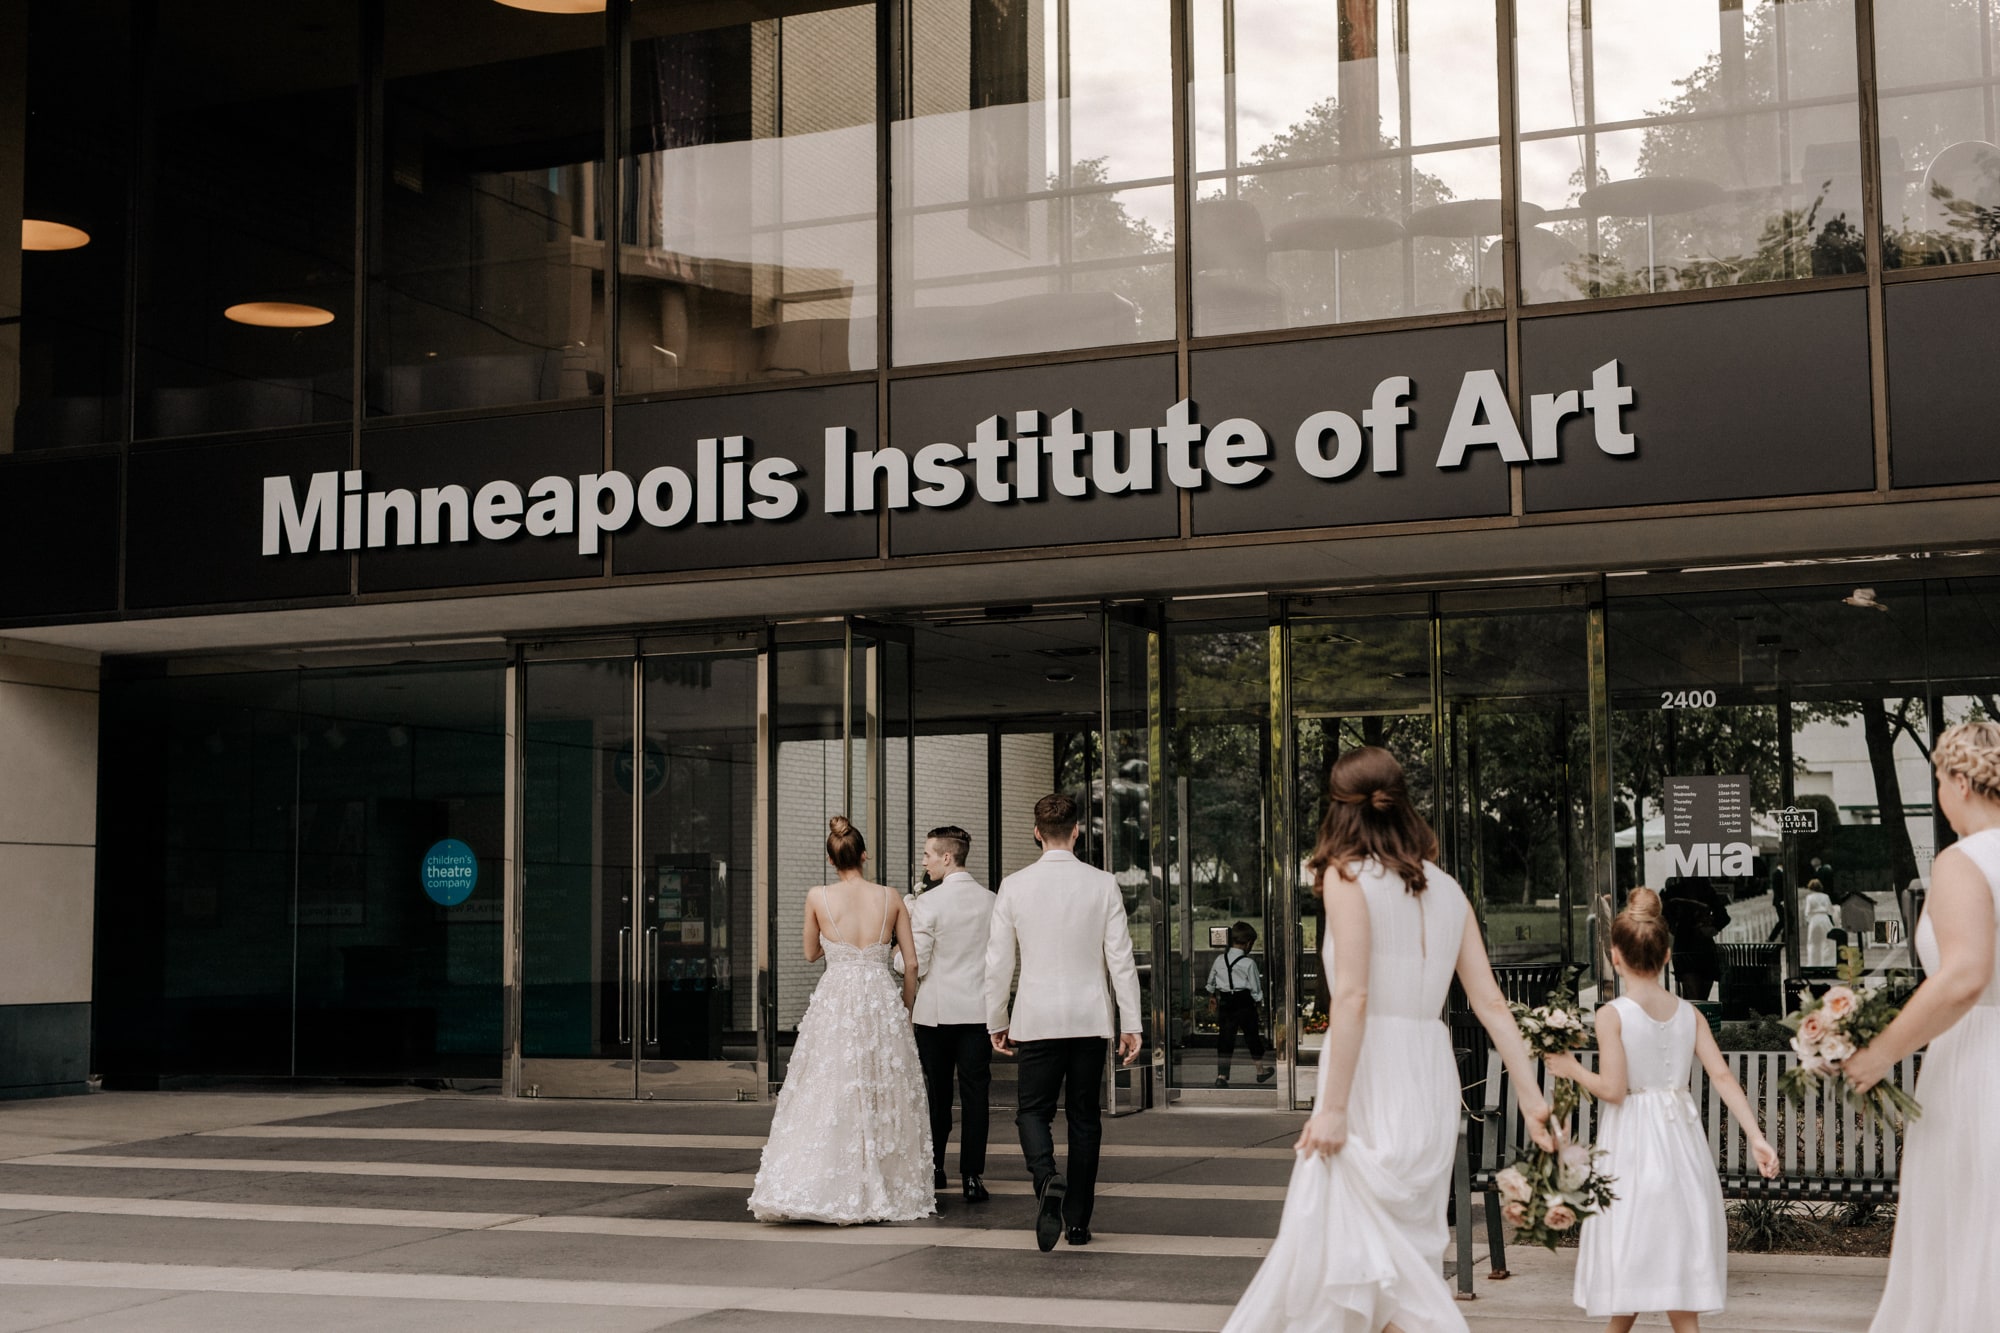 A bride and groom walking into the Minneapolis Institute of Art, following by their wedding party, during a beautiful wedding captured by Minneapolis wedding photographer Josh Olson.